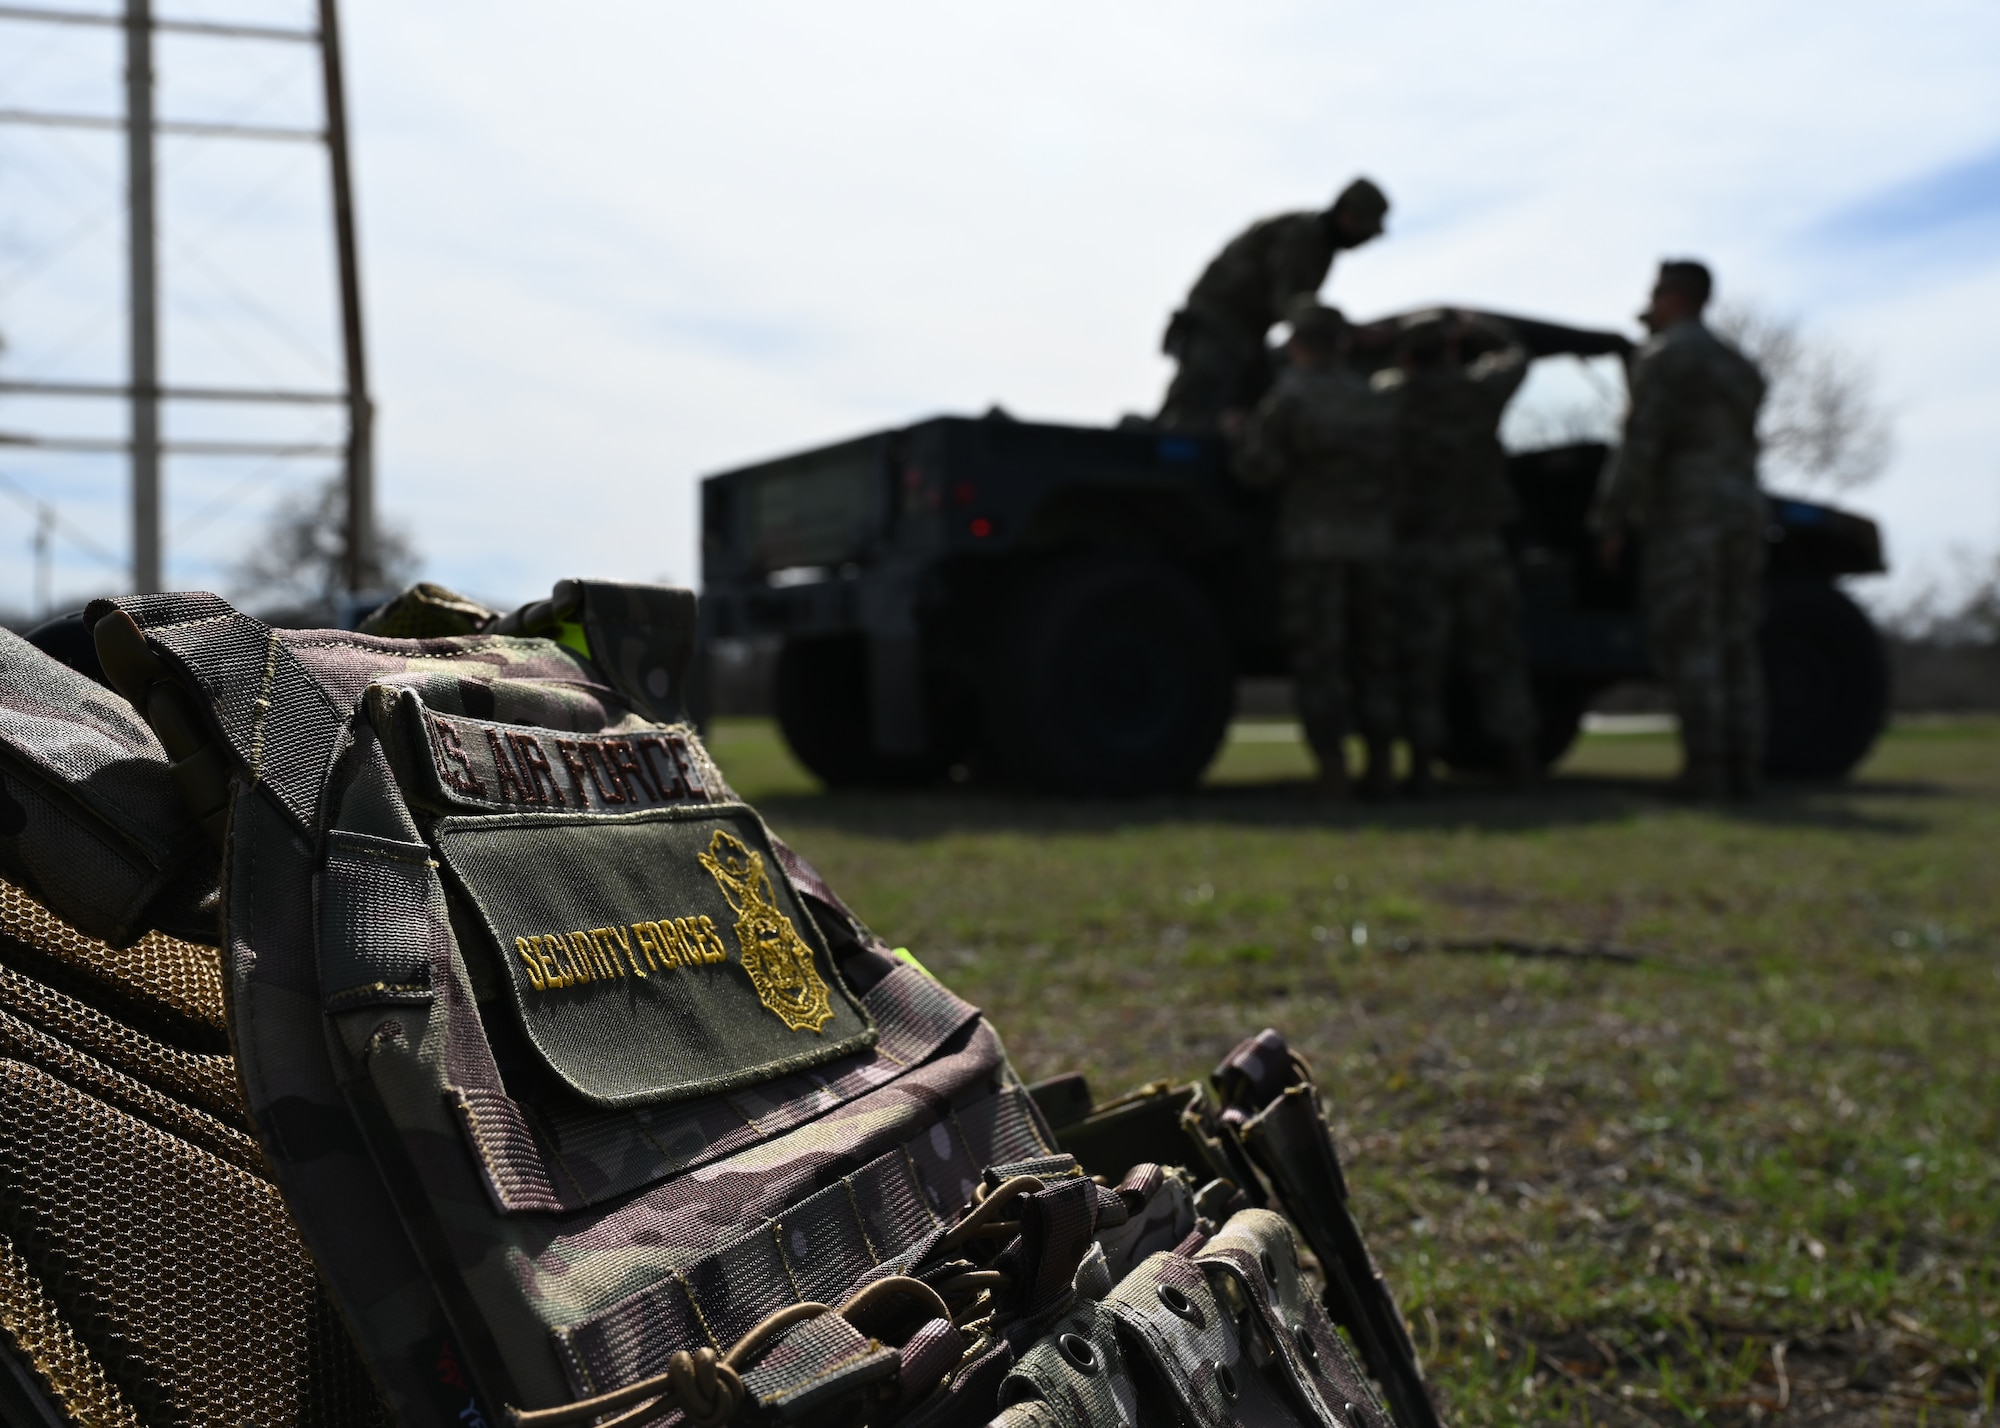 343rd Training Squadron/OL-A Airmen participate in joint exercises with the Texas Army National Guard.